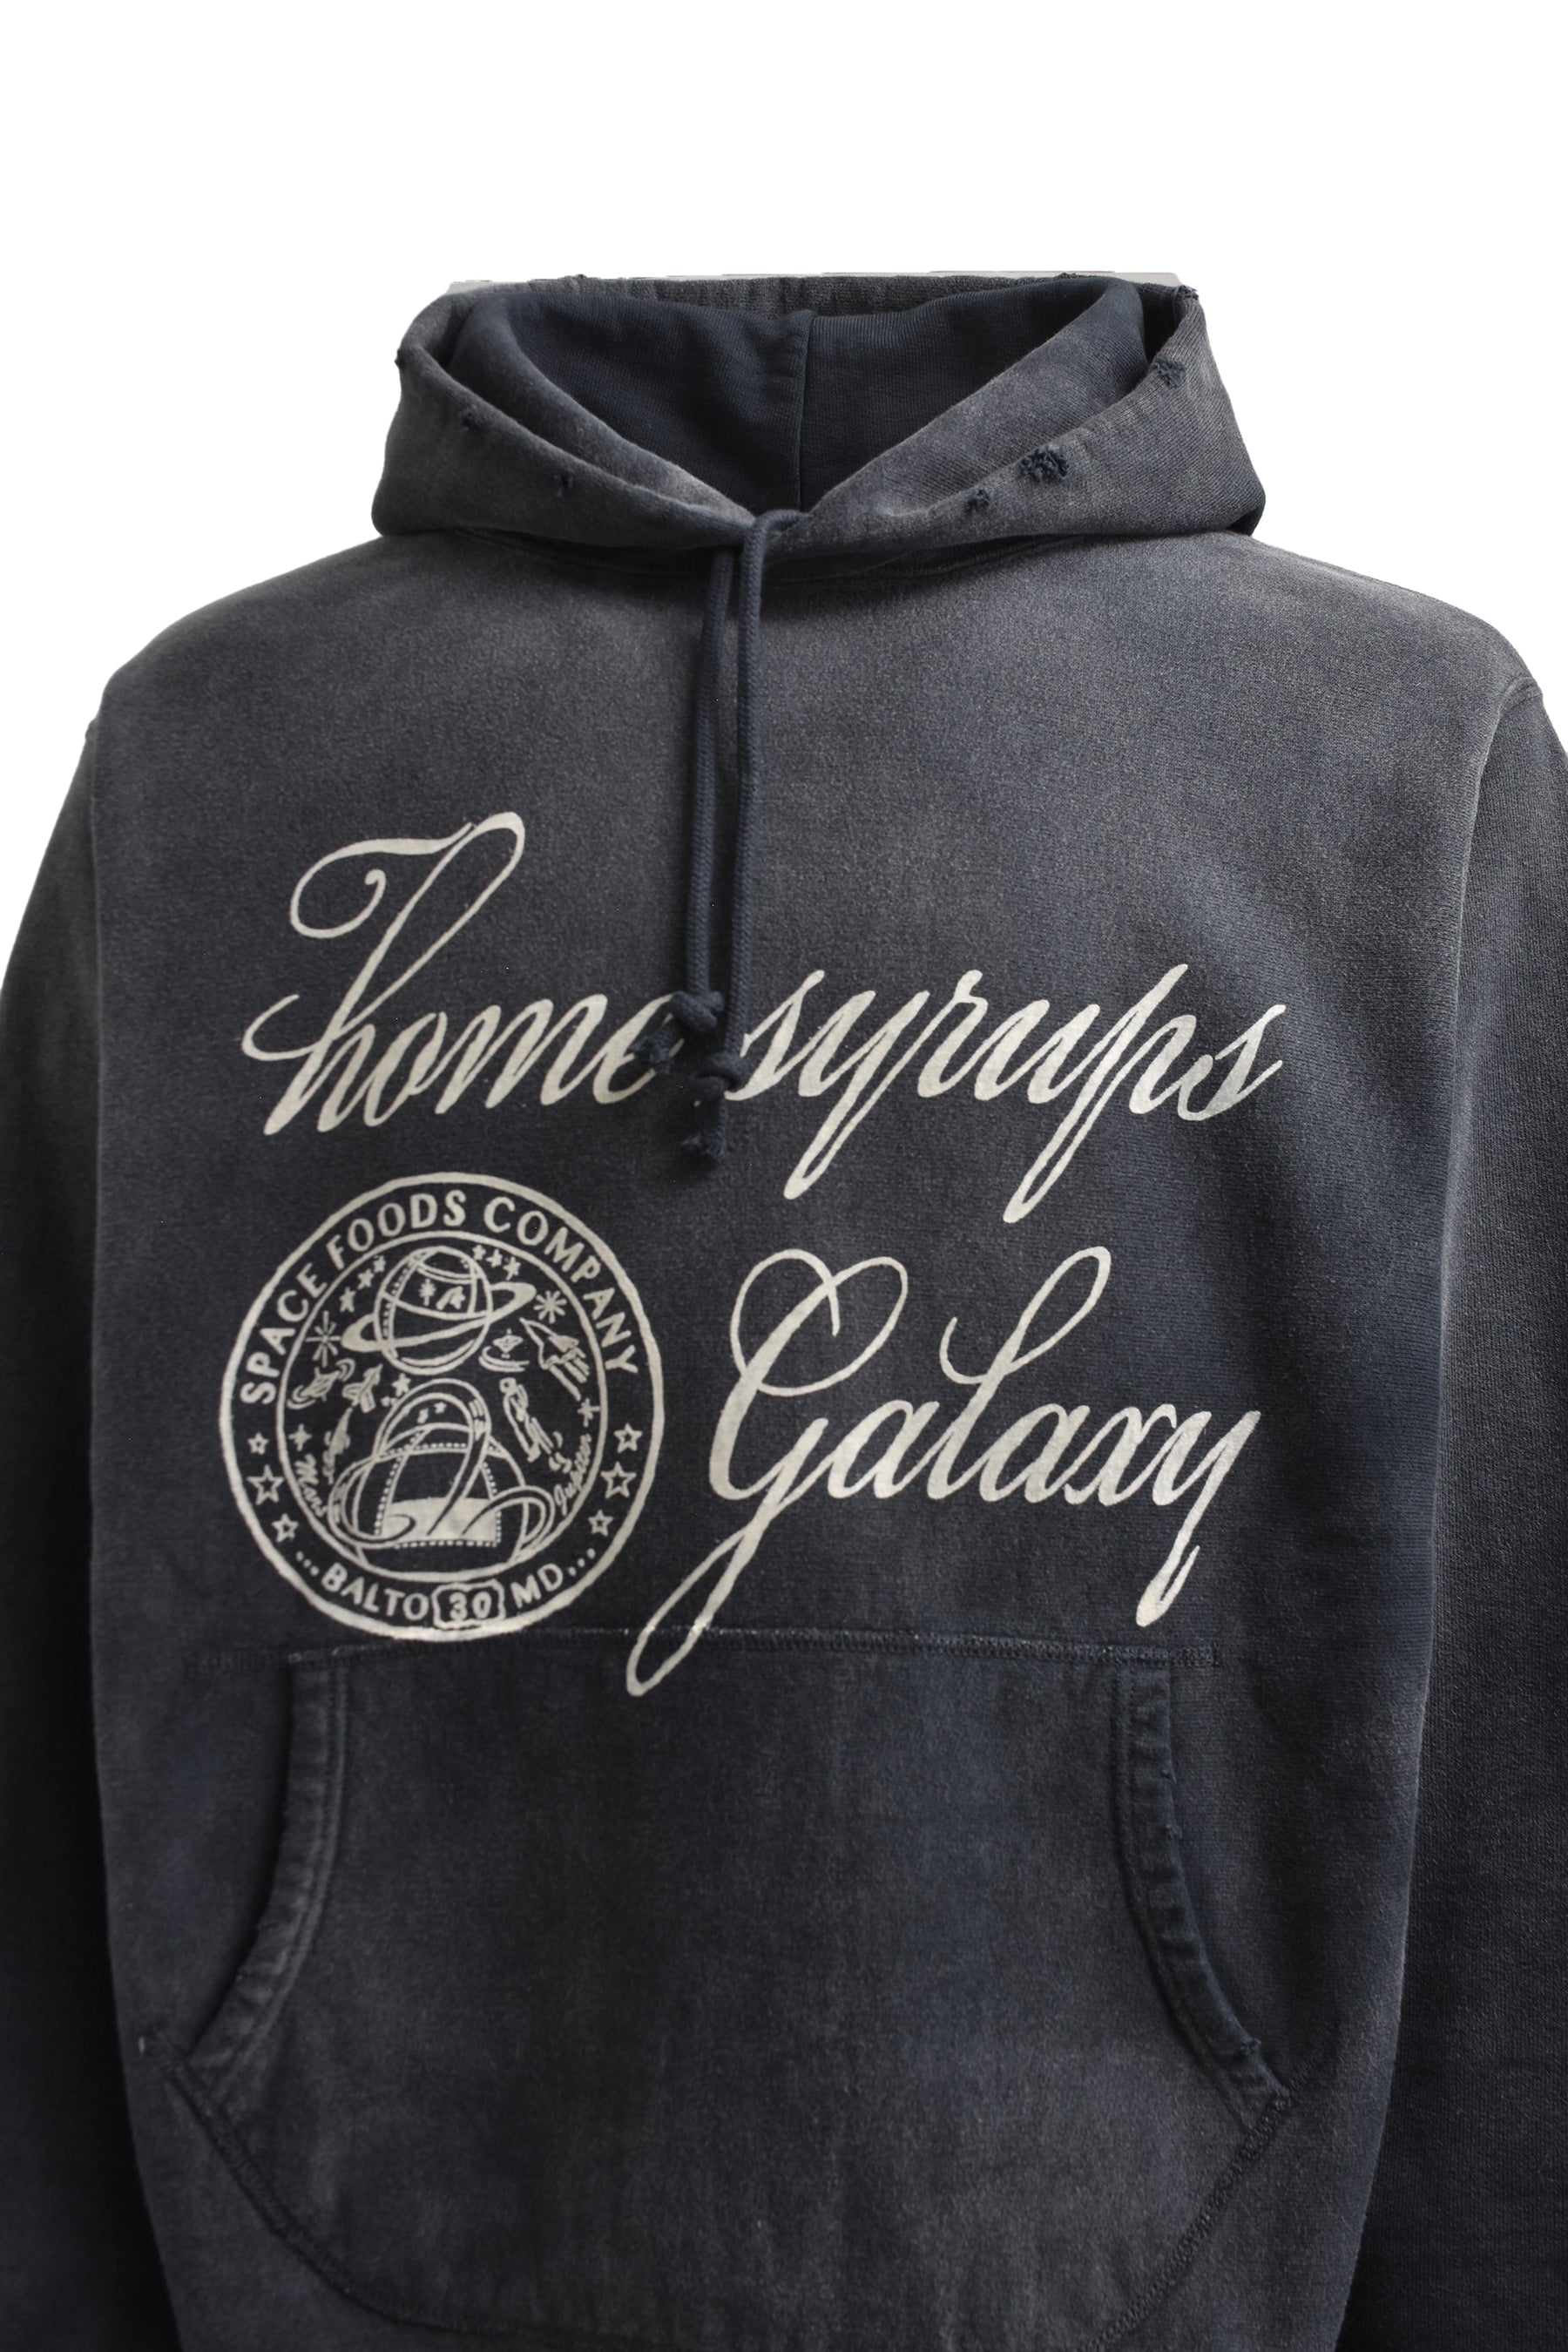 GALAXY SYRUP HOODIE / BLK AGEING